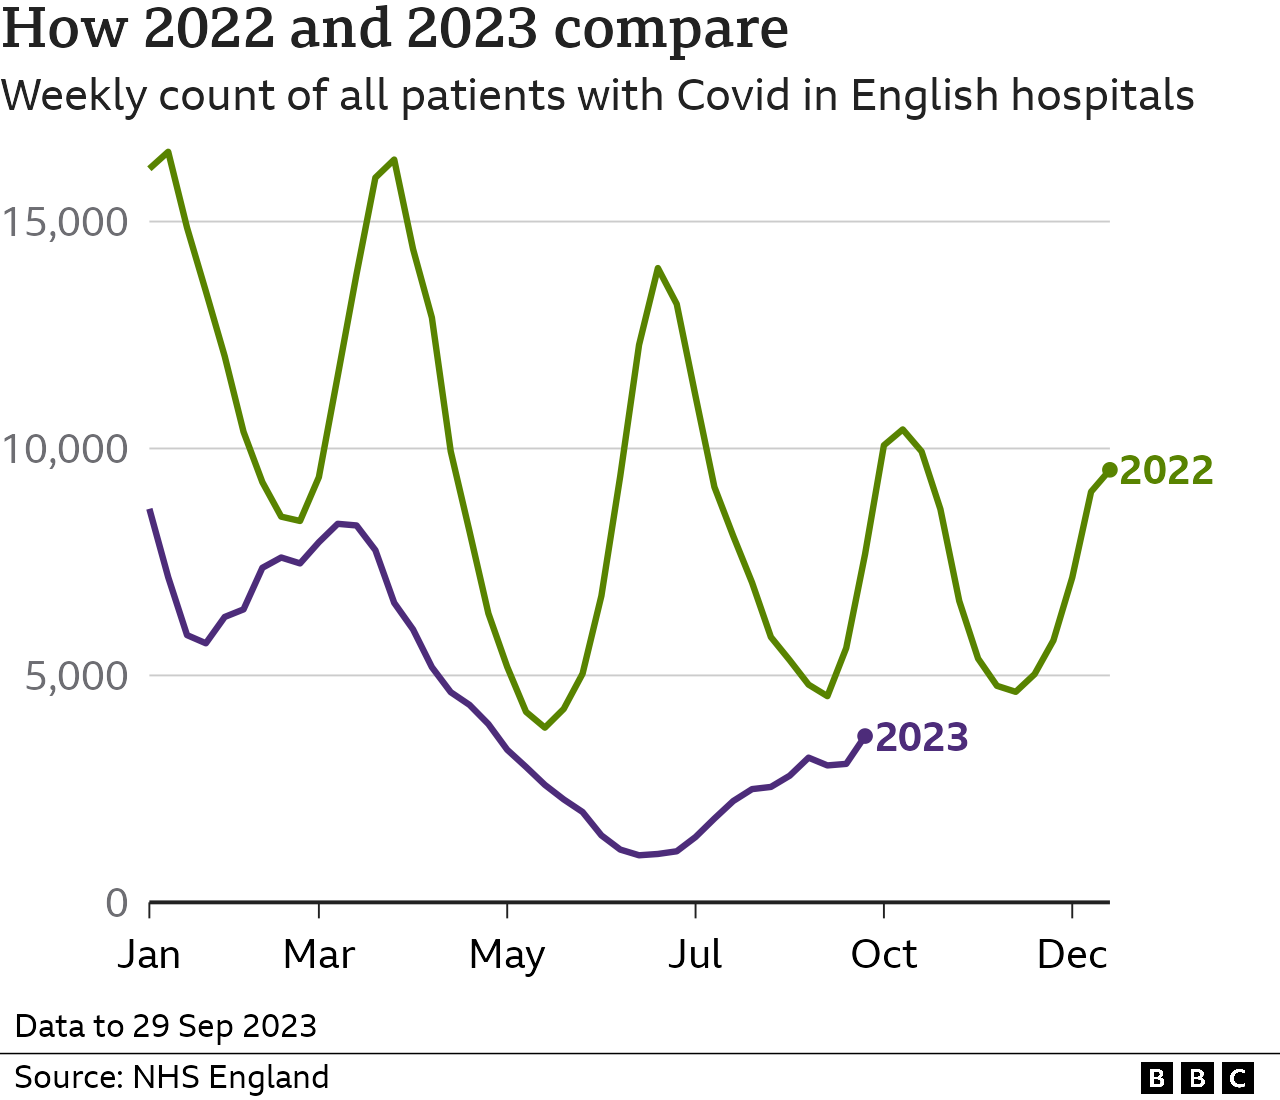 Chart showing numbers of patients in English hospitals with Covid during 2022 and 2023, with 3,675 in the week ending 29 September 2023 compared with 7,672 in the same week of 2022.